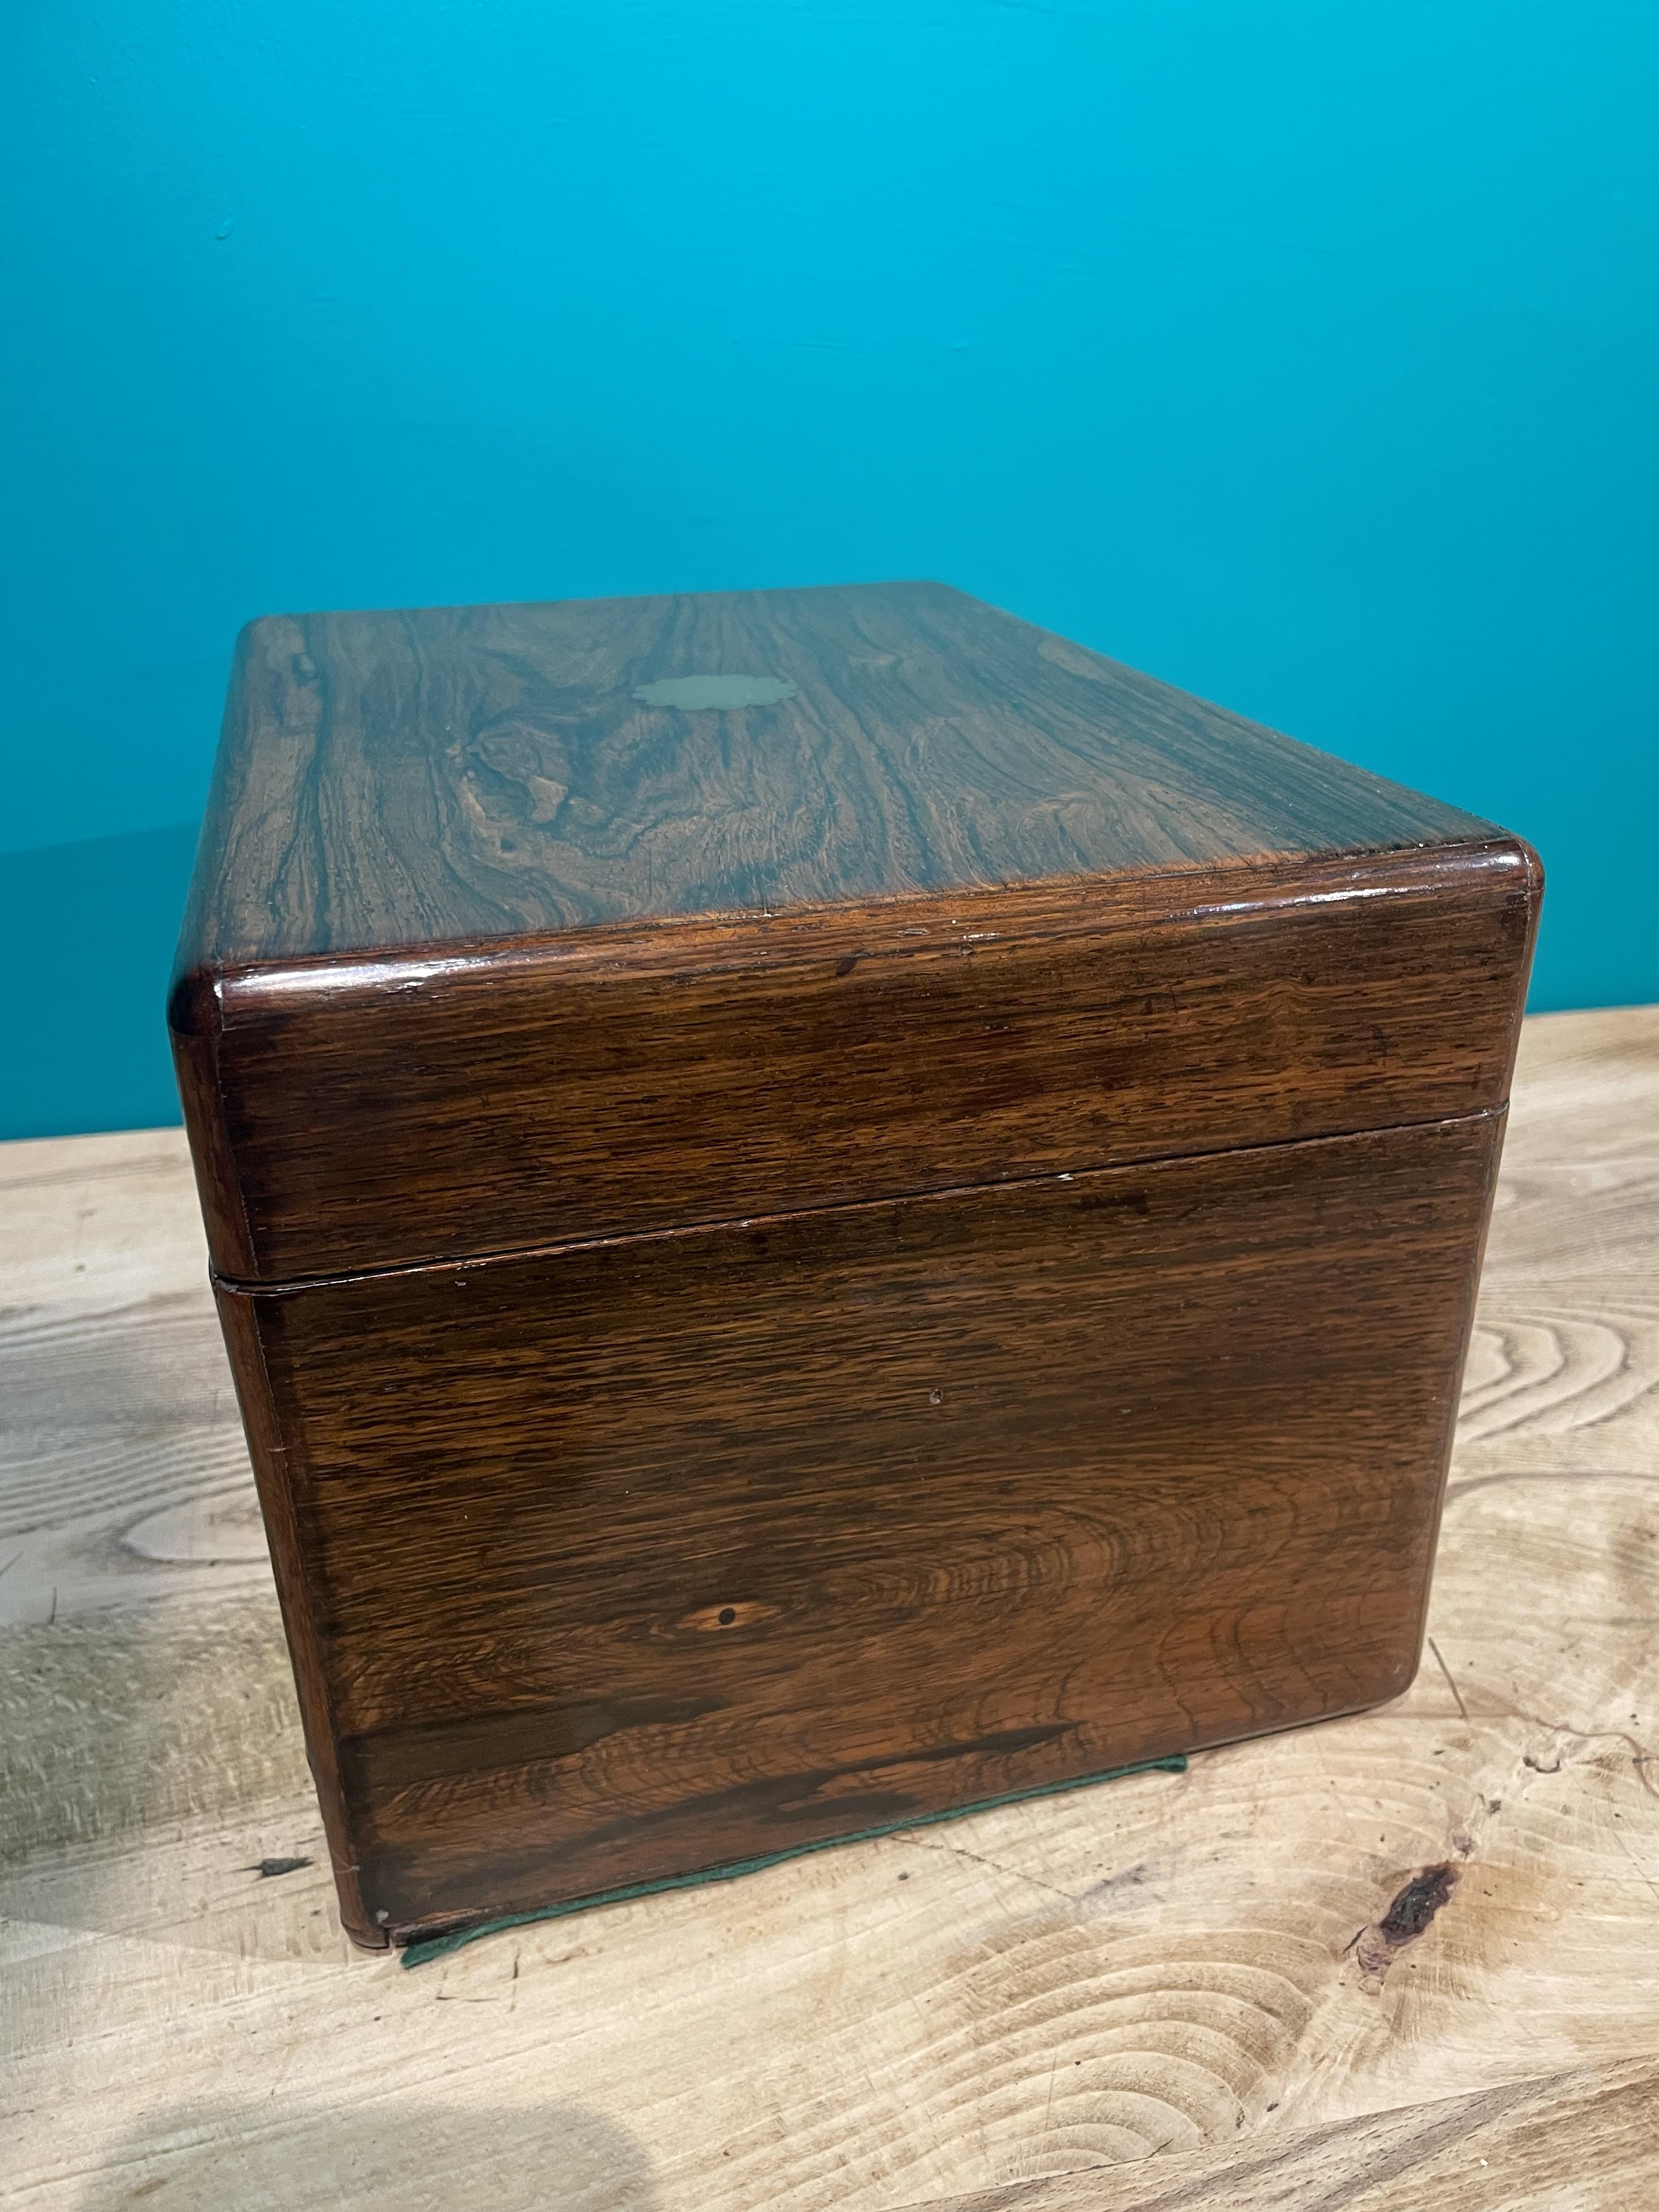 A Rosewood Vanity Box With Silver Lidded Fittings. Dated London 1834 - Image 6 of 9